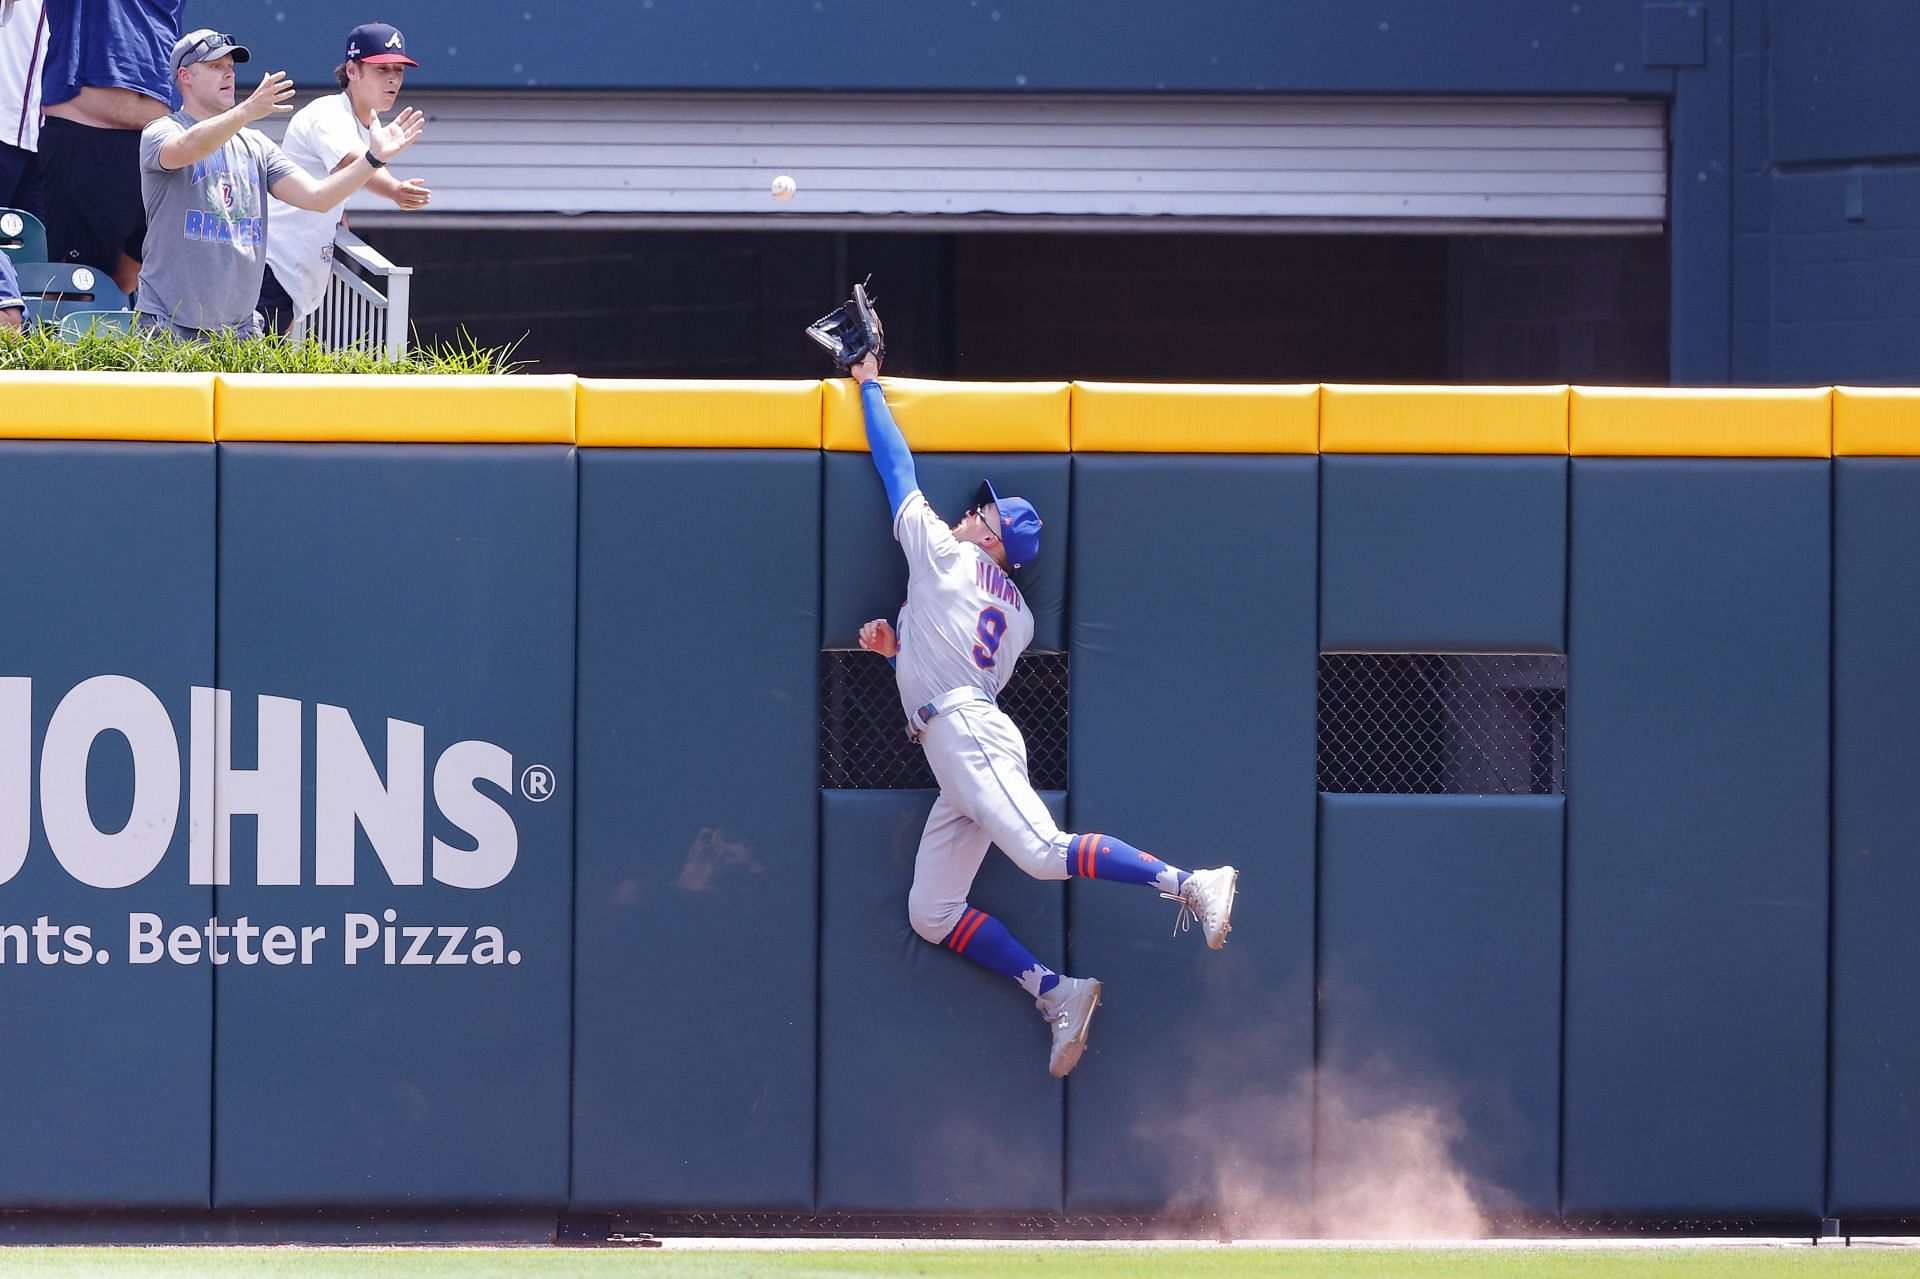 Timmy Trumpet plays after big Nimmo catch, Mets beat Dodgers